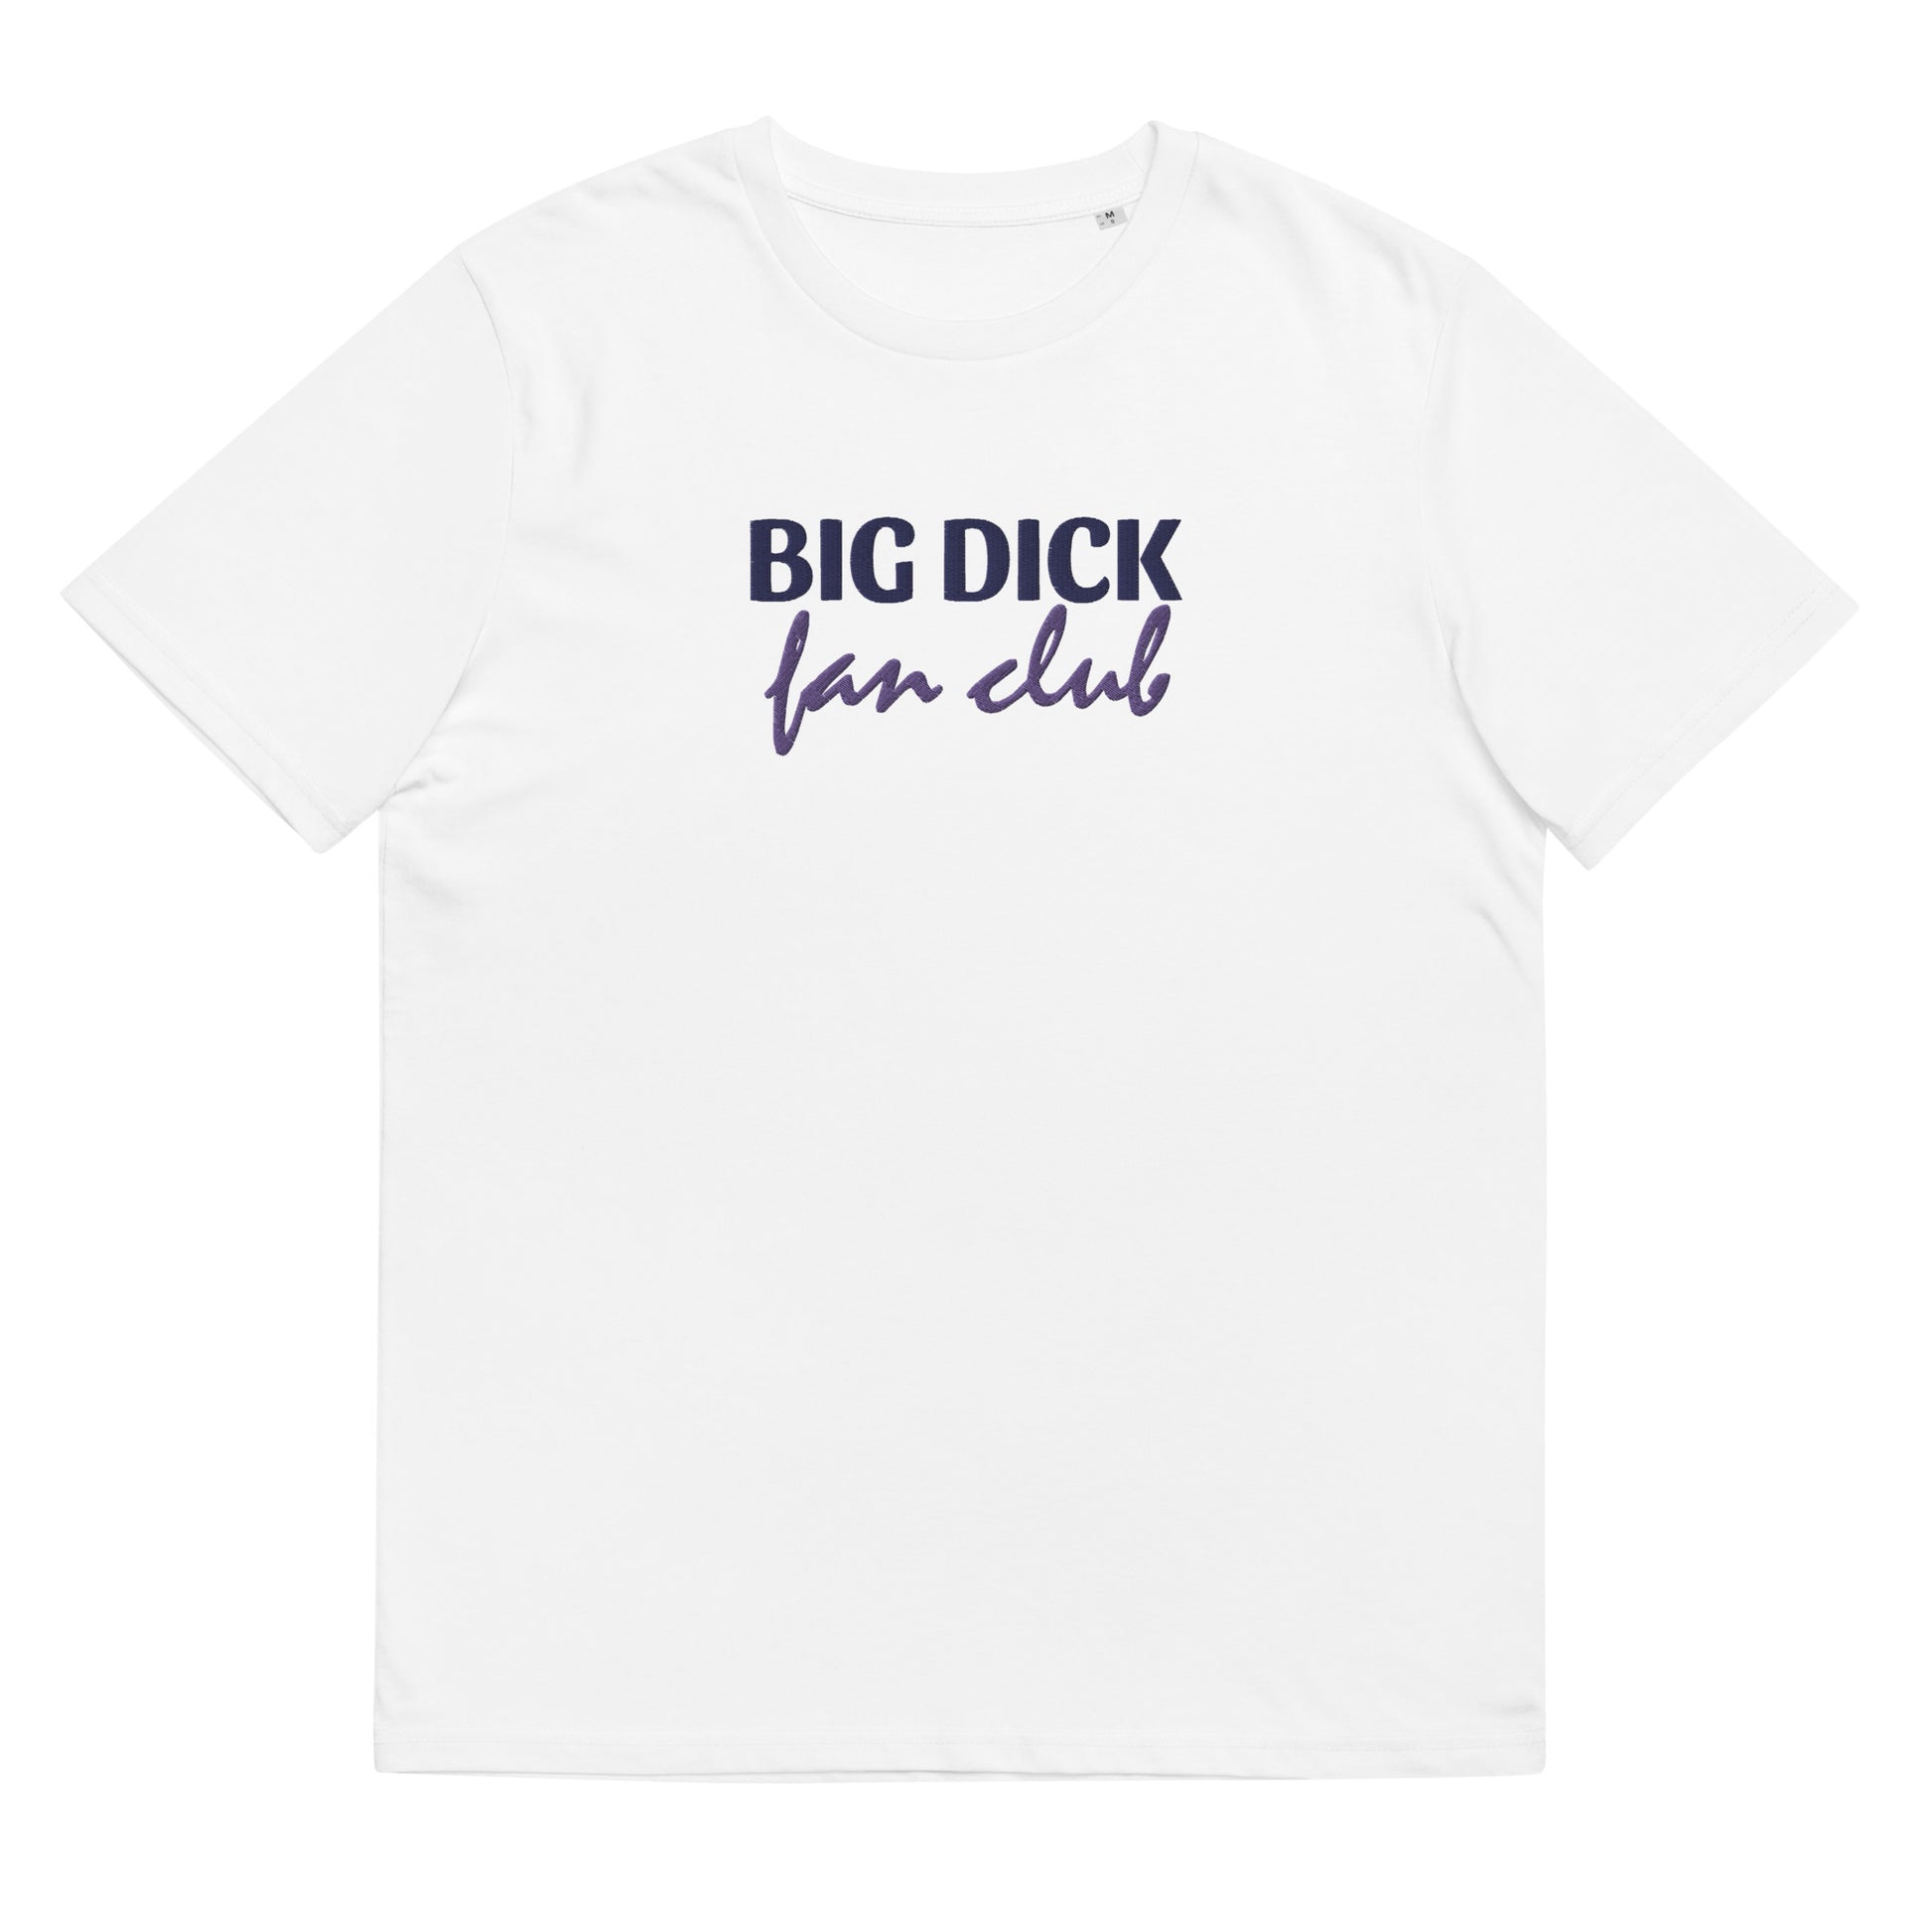 Fitted white organic cotton t-shirt with an embroidered gay joke: "big d fan club" on the center chest. Available in sizes S to 3XL.